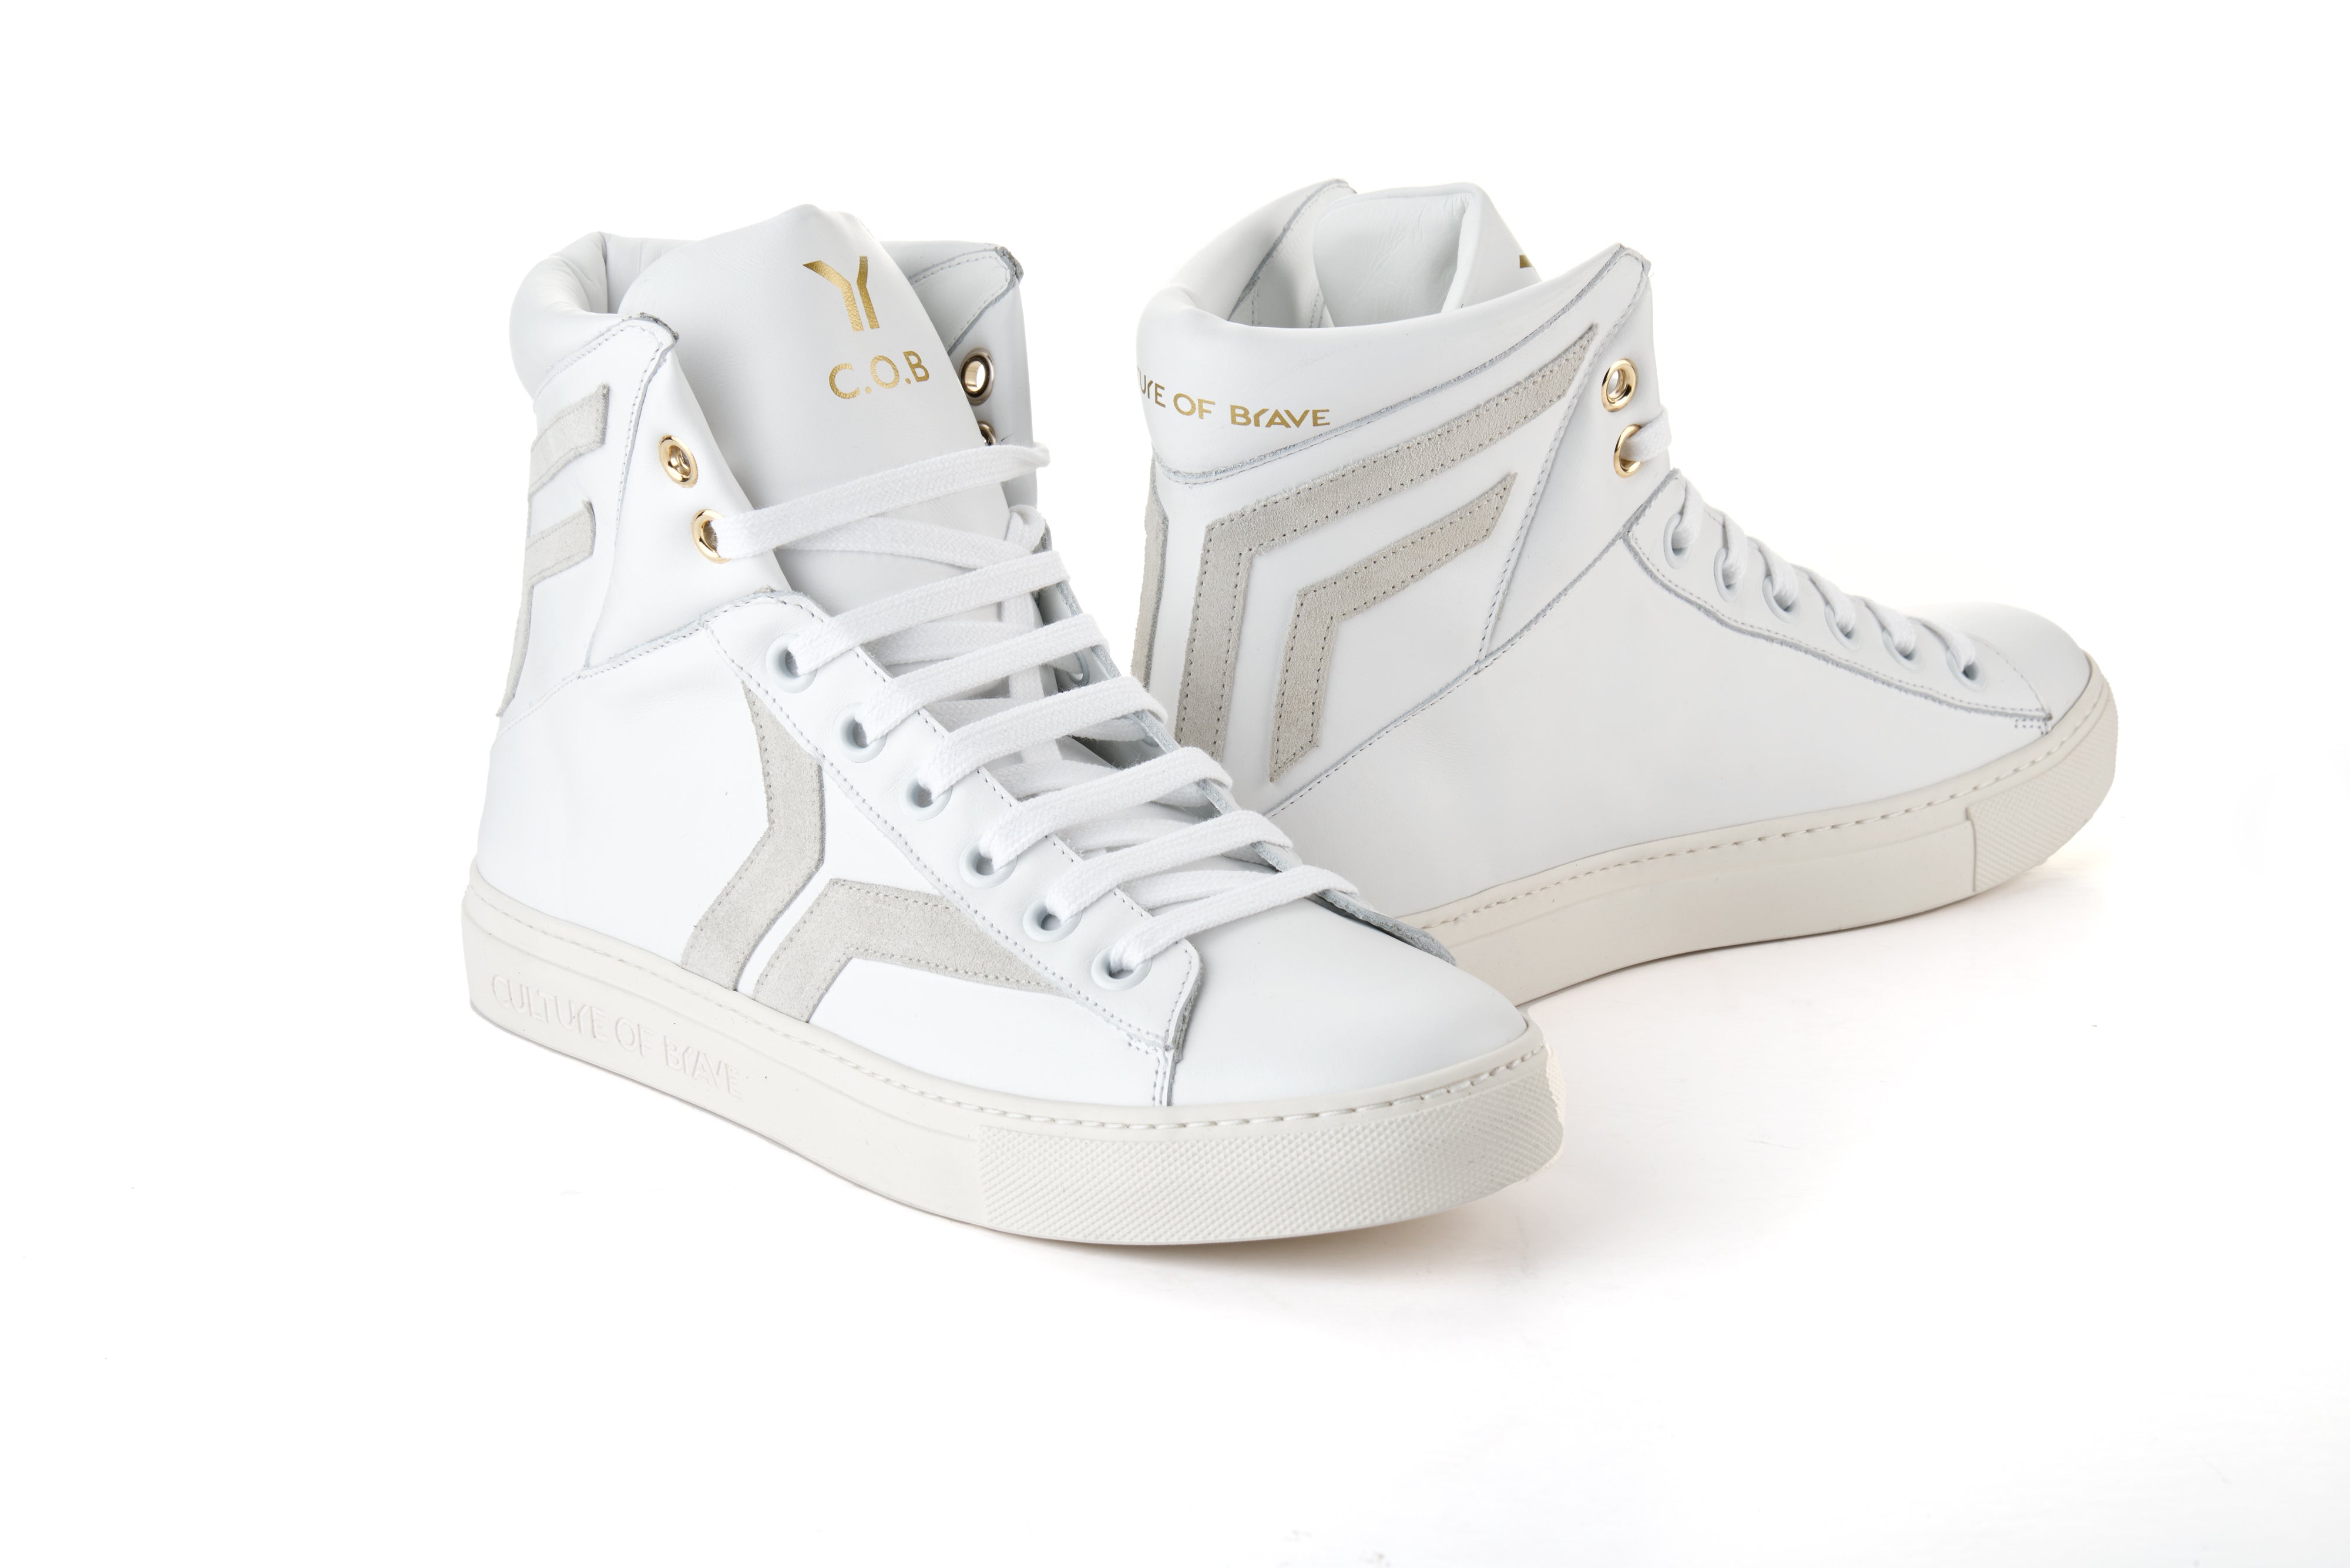 Prepared to Risk S21 Women White leather offwhite wing high cut